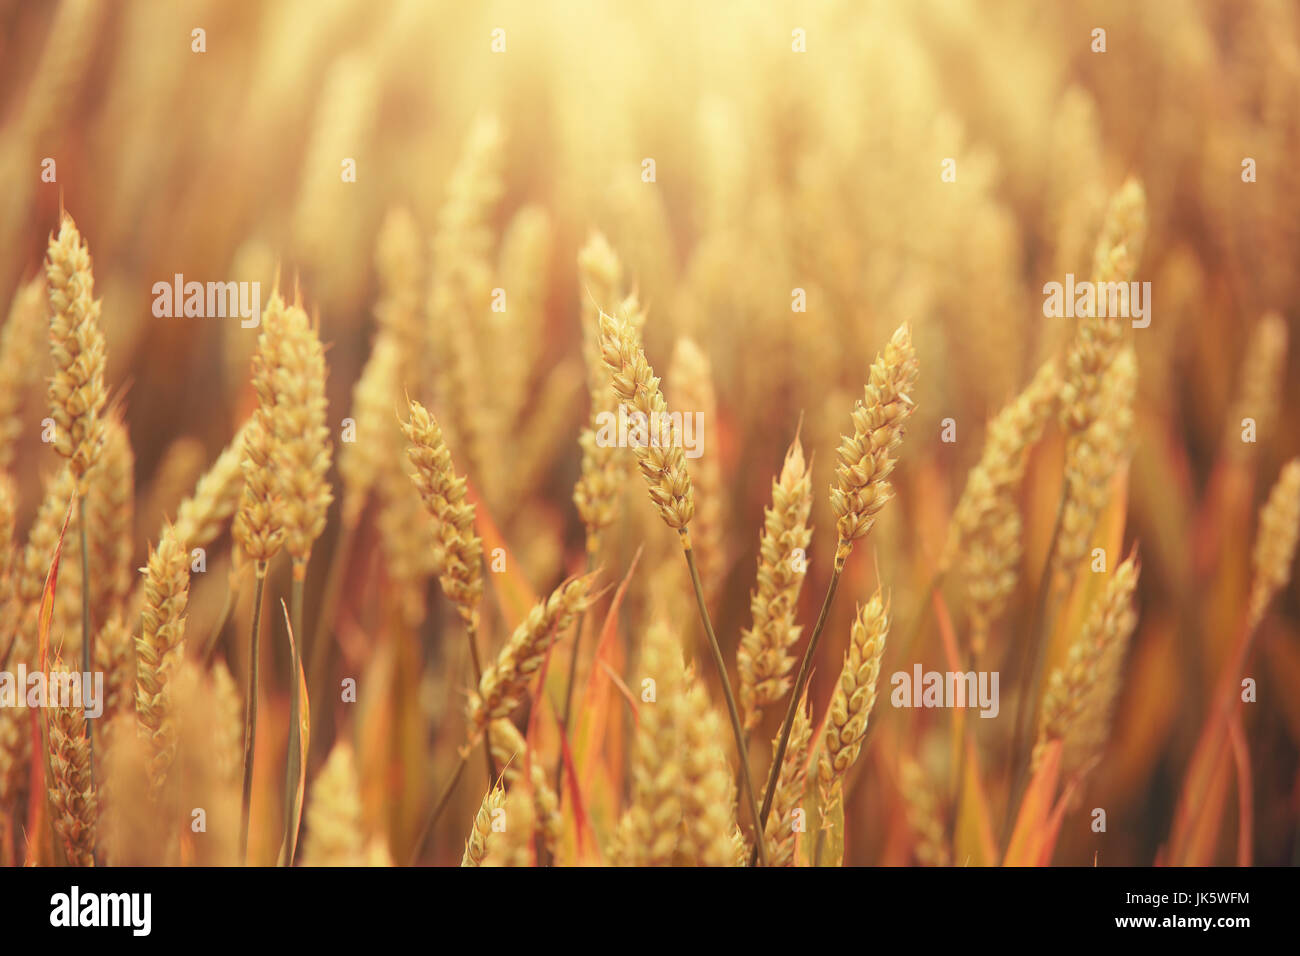 Golden wheat spikelets on sunny background. Field of ripe wheat in he evening sunlight. Stock Photo